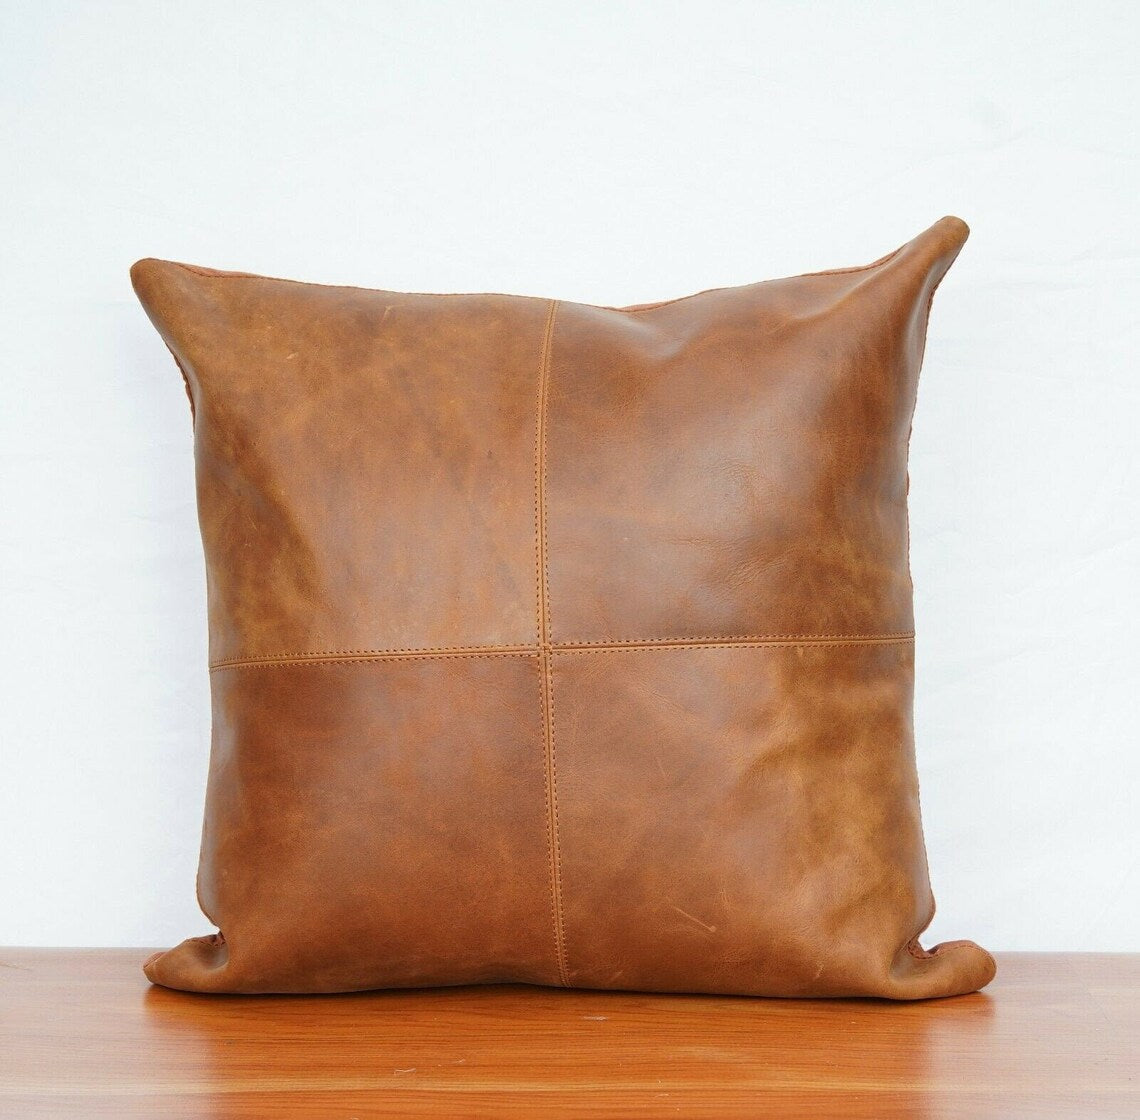 Melbourne Leather Co Genuine Leather Cowhide Cushion Cover 60*60cm. - LCC07